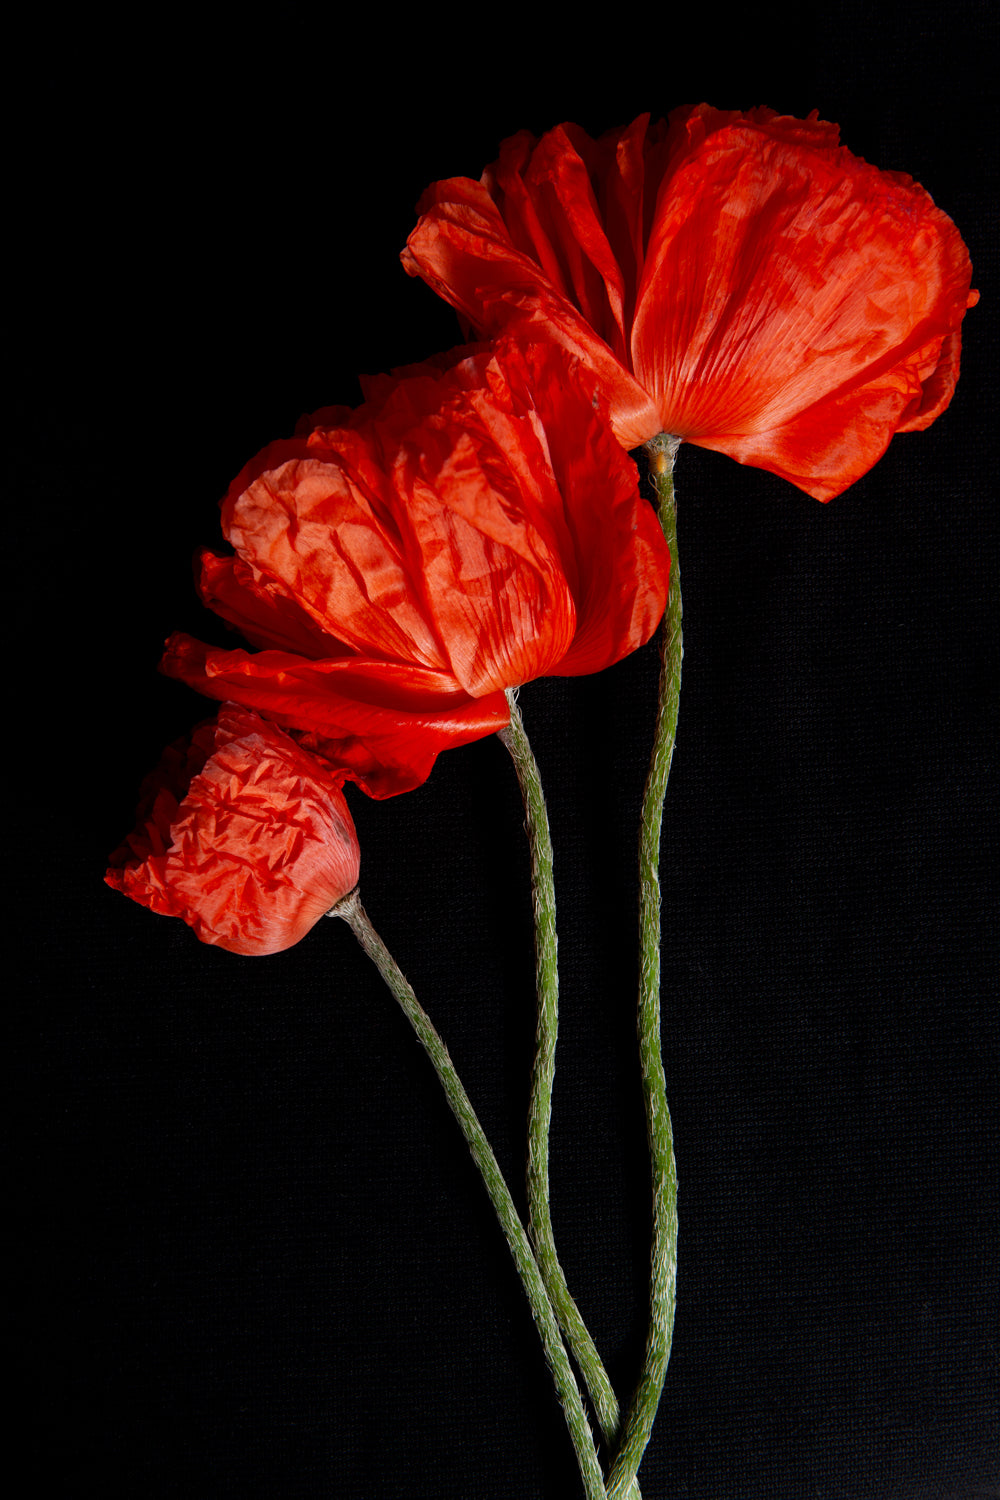 a photo of 3 poppies laying flat on a black background. They are staggered in levels a small budding red poppy is at the lowest left, mid hight and to the right of it is a fully bloomed red poppy and to the right again is another one slightley higher than the middle one a large red full bloomed poppy. The photograph is a part of Laura Cook's limited edition series entitled Reminiscence which explores family, history and relationship through poppies in the studio.